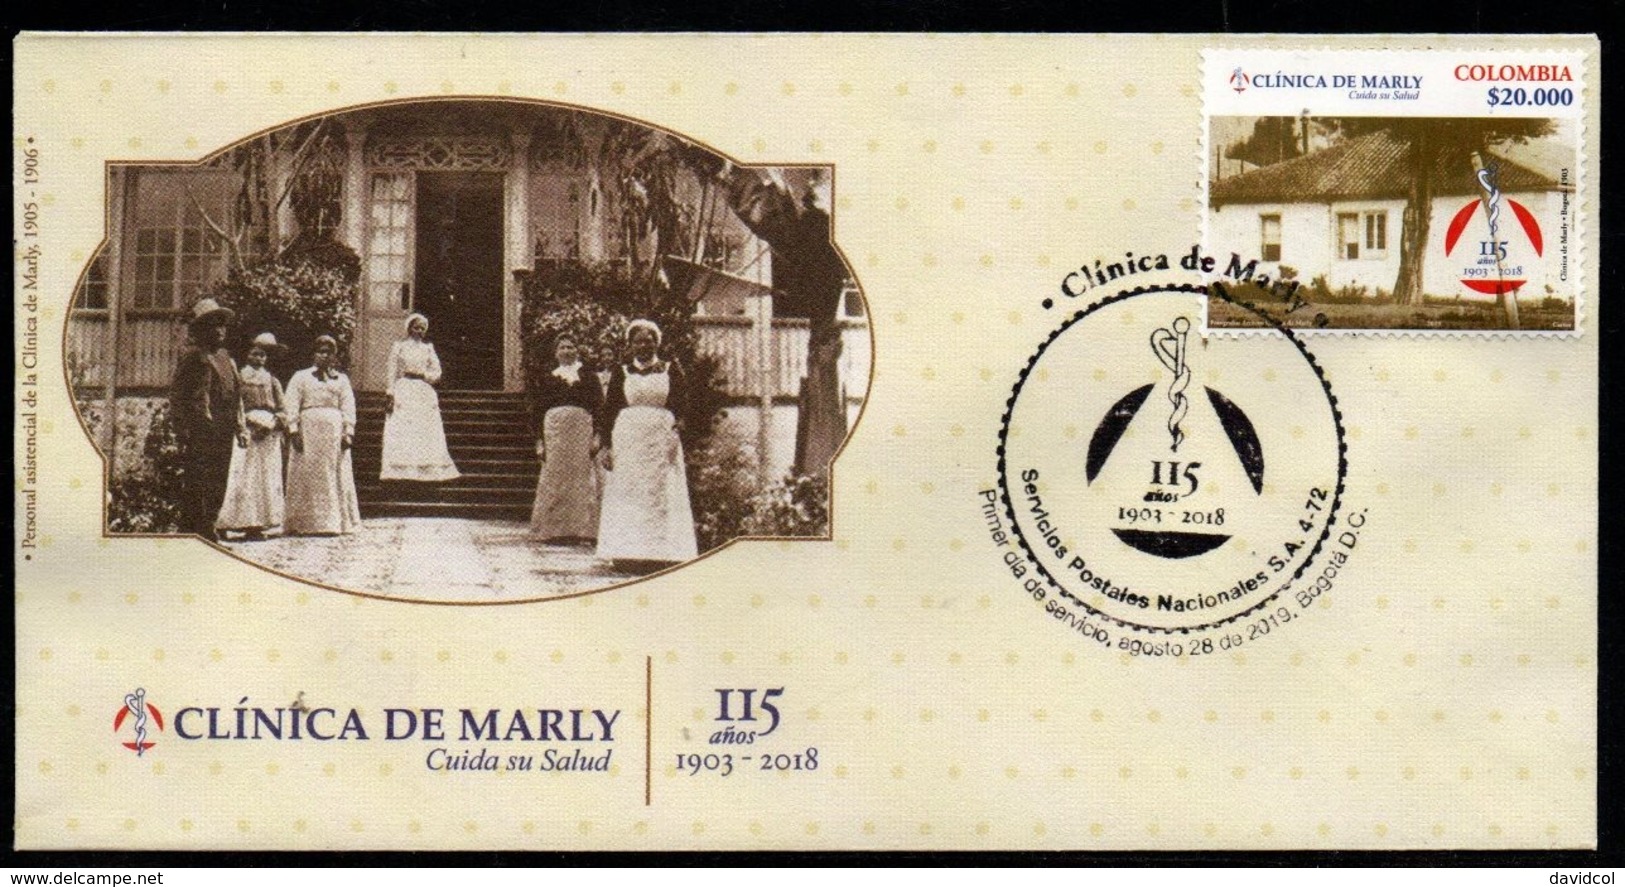 COLOMBIA- 2019 - FDC / SPD - MARLY'S HOSPITAL , 115 YEARS. - Colombia